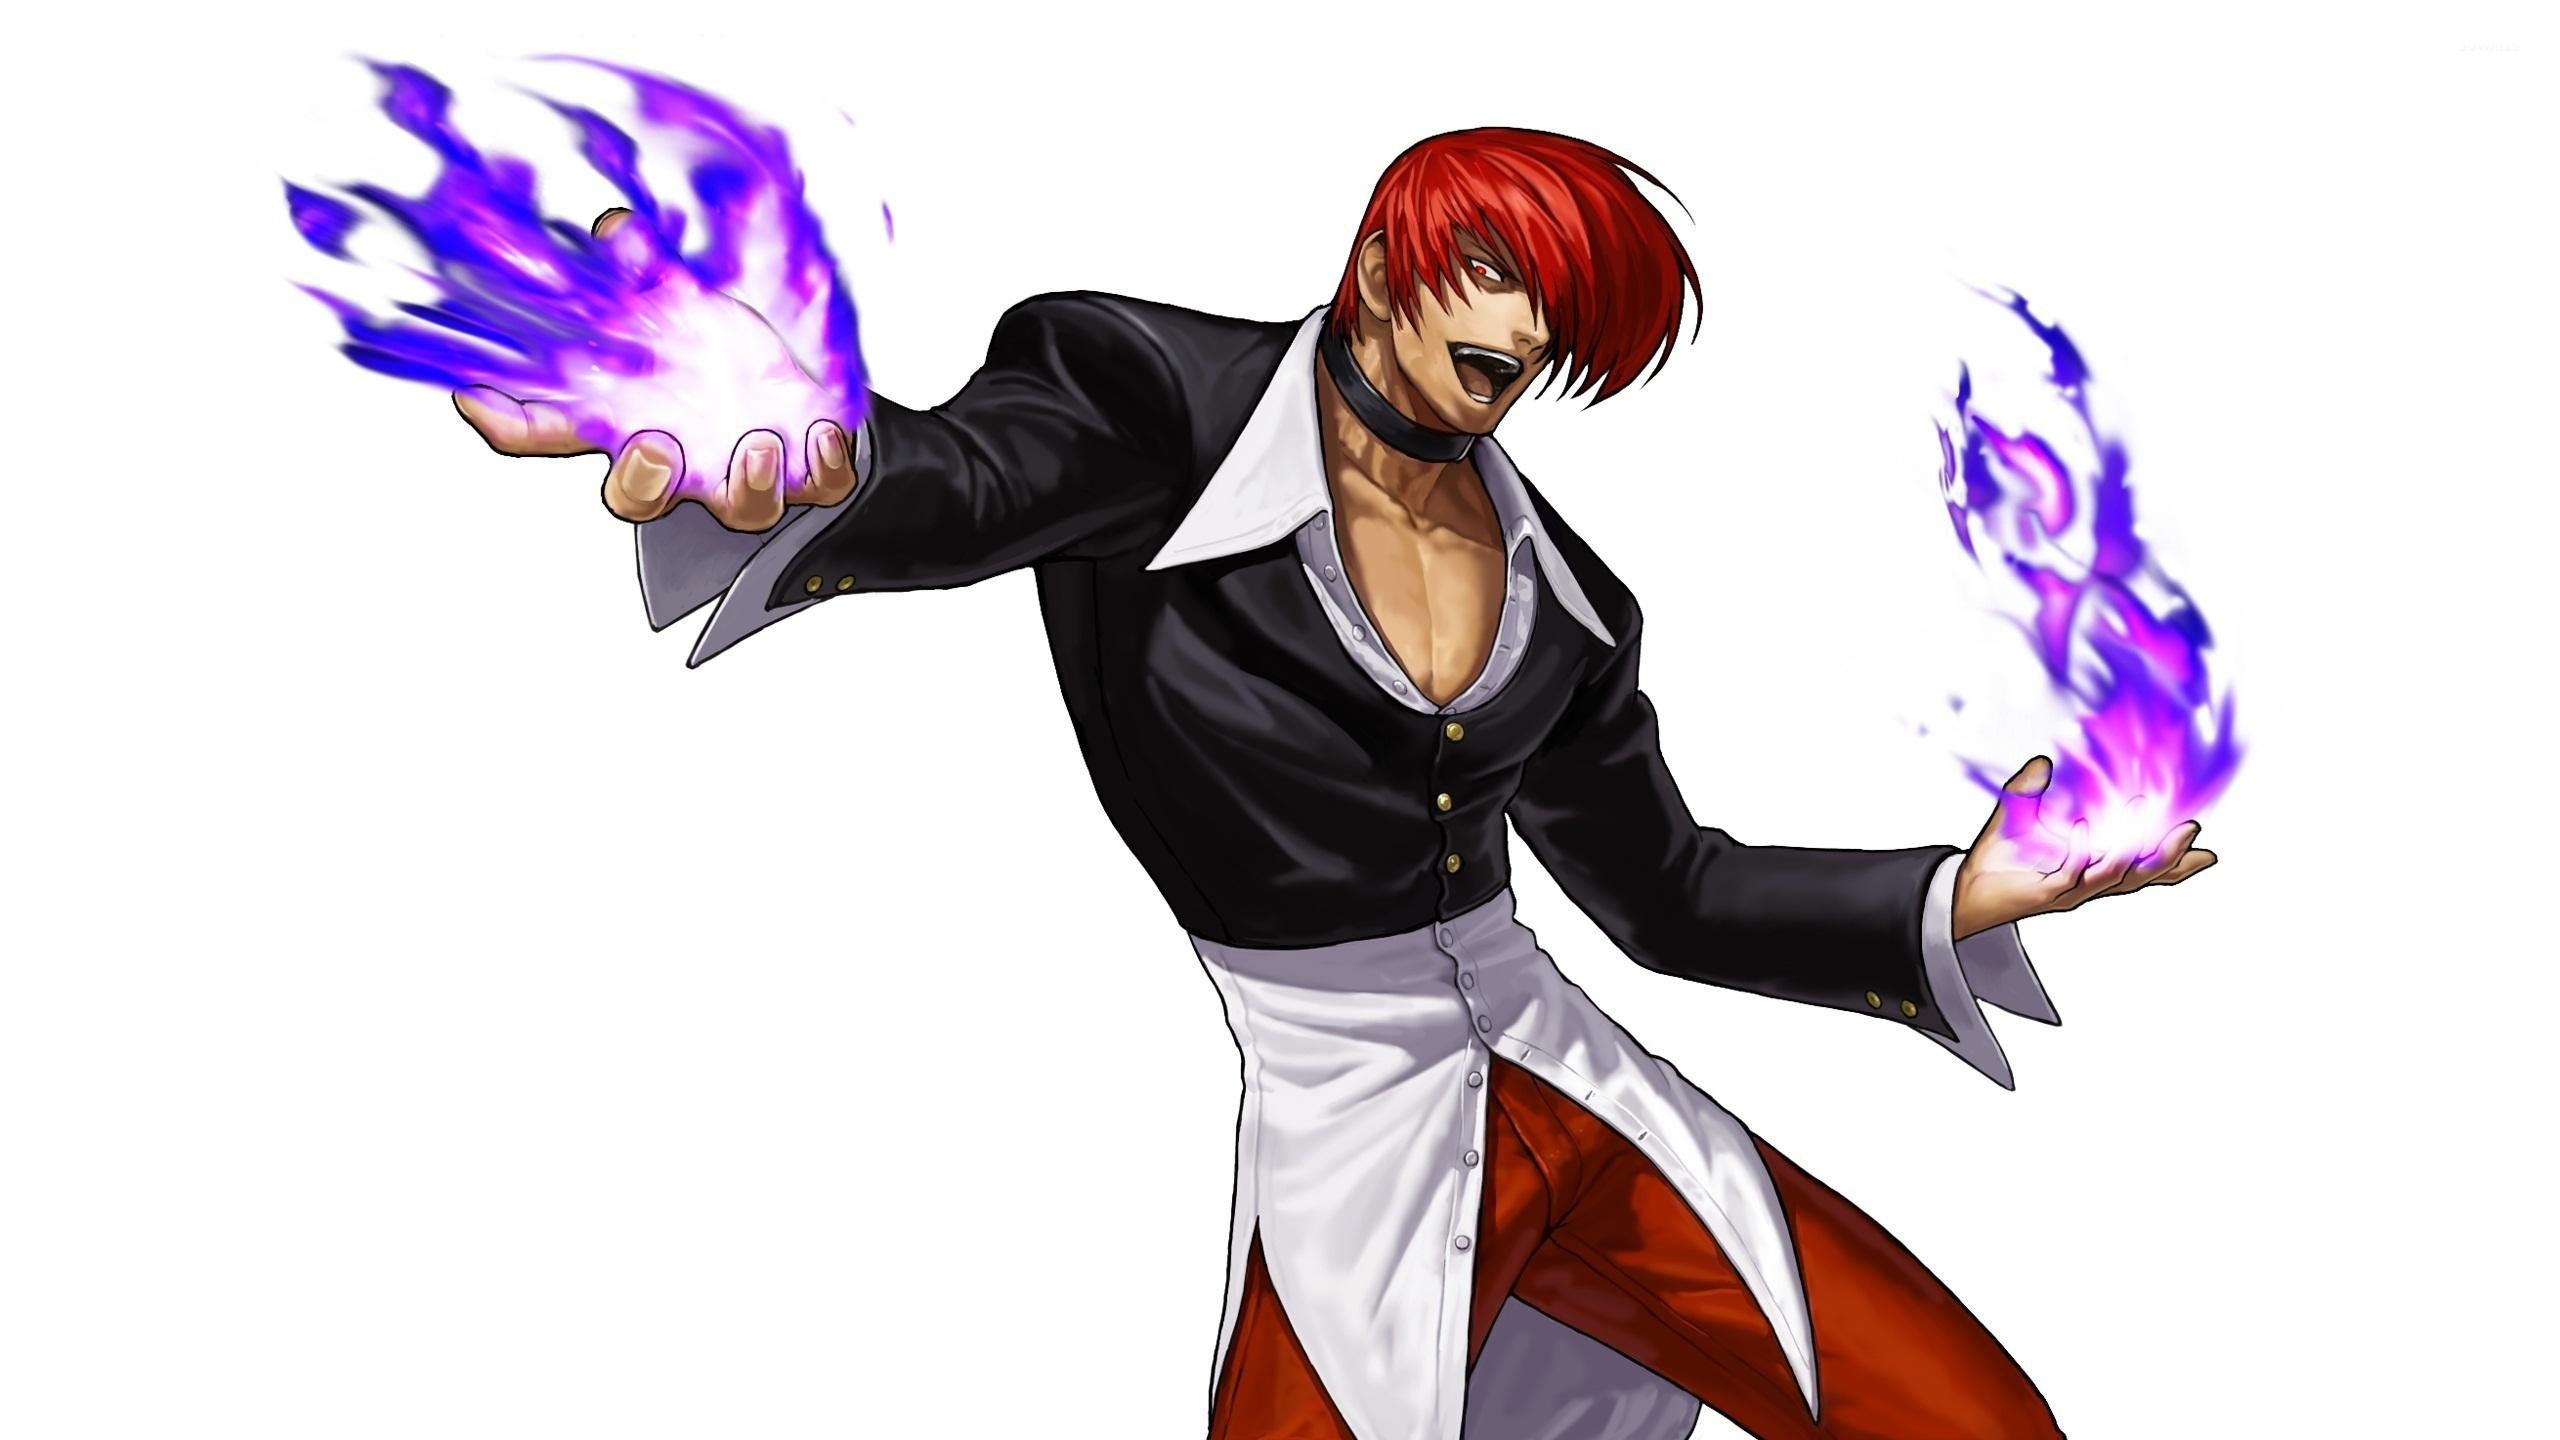 Iori Yagami wallpapers, Posted by Ryan Simpson, Gaming backgrounds, High-resolution images, 2560x1440 HD Desktop